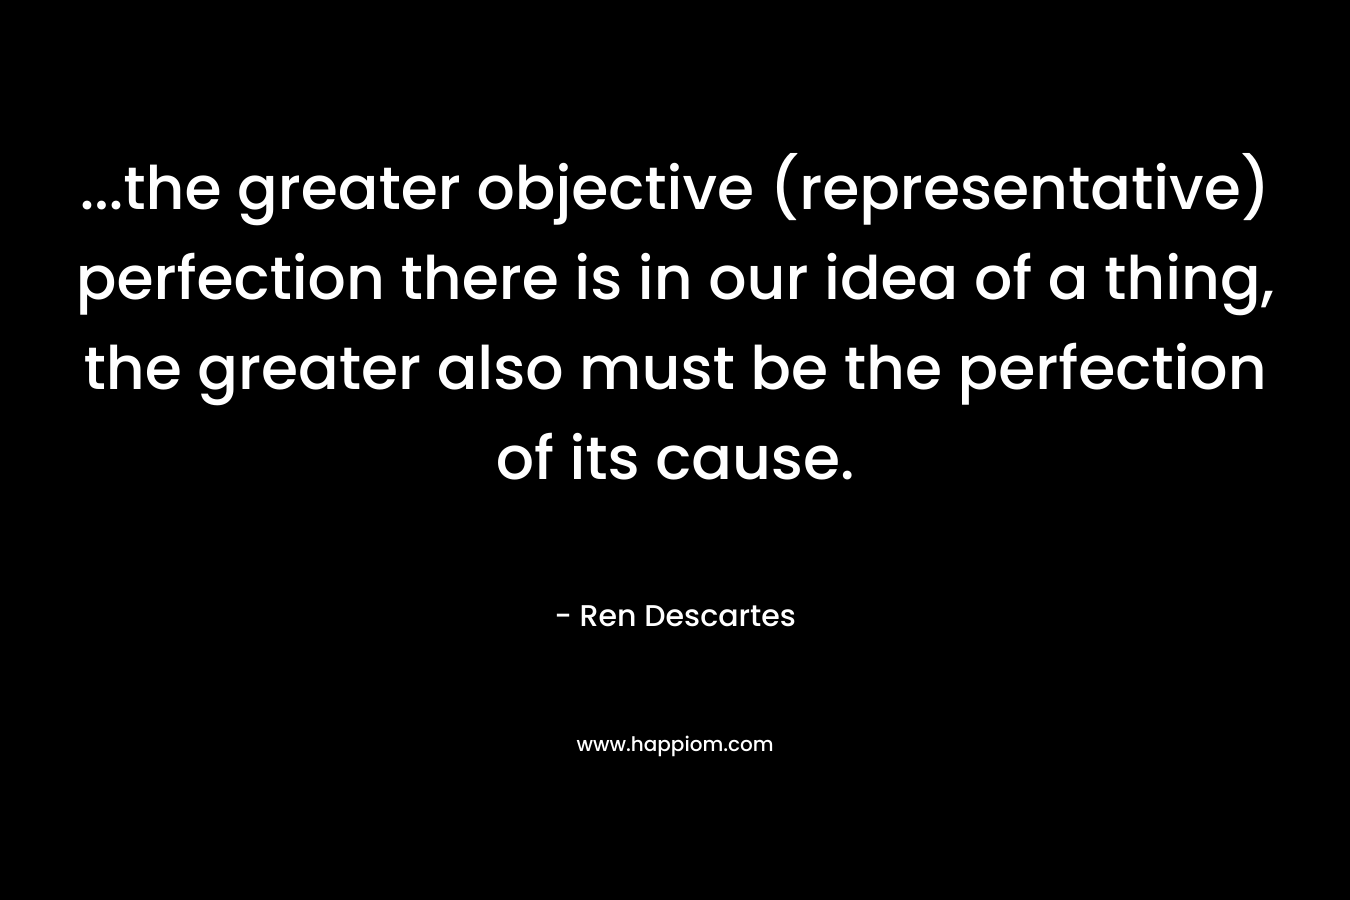 ...the greater objective (representative) perfection there is in our idea of a thing, the greater also must be the perfection of its cause.